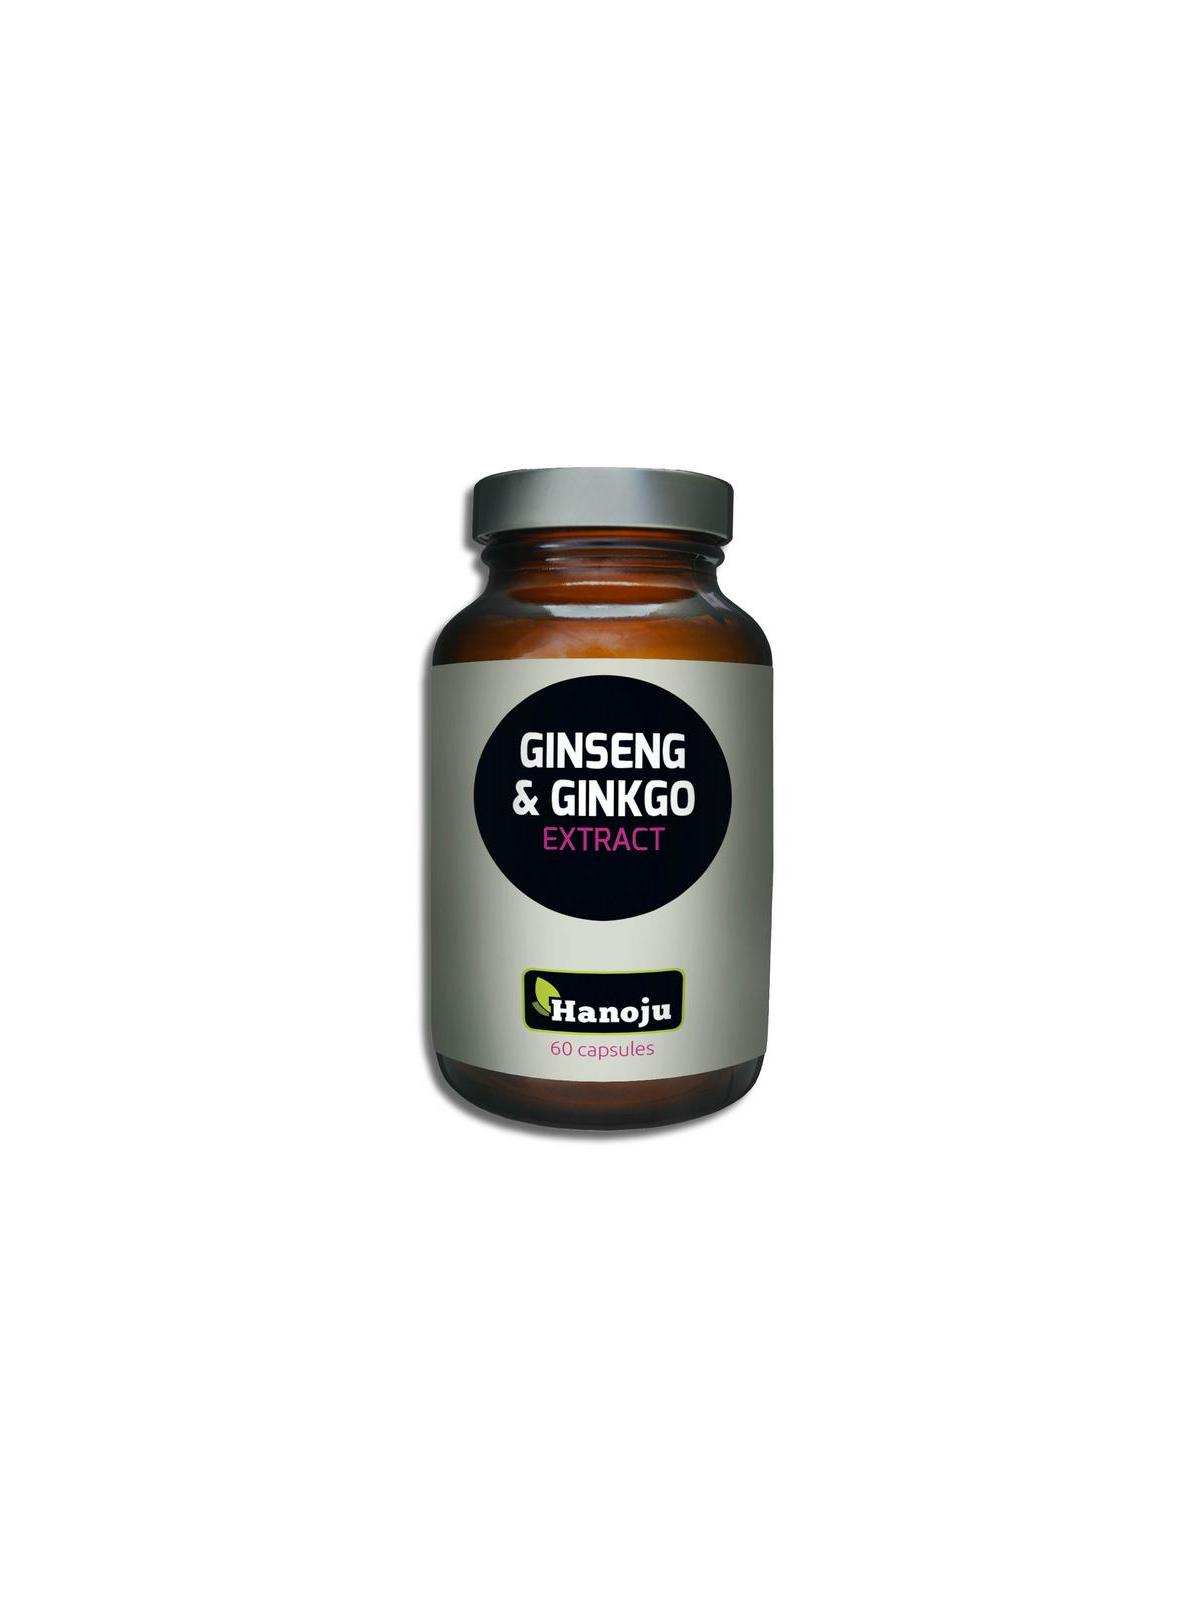 Ginseng & ginkgo extract